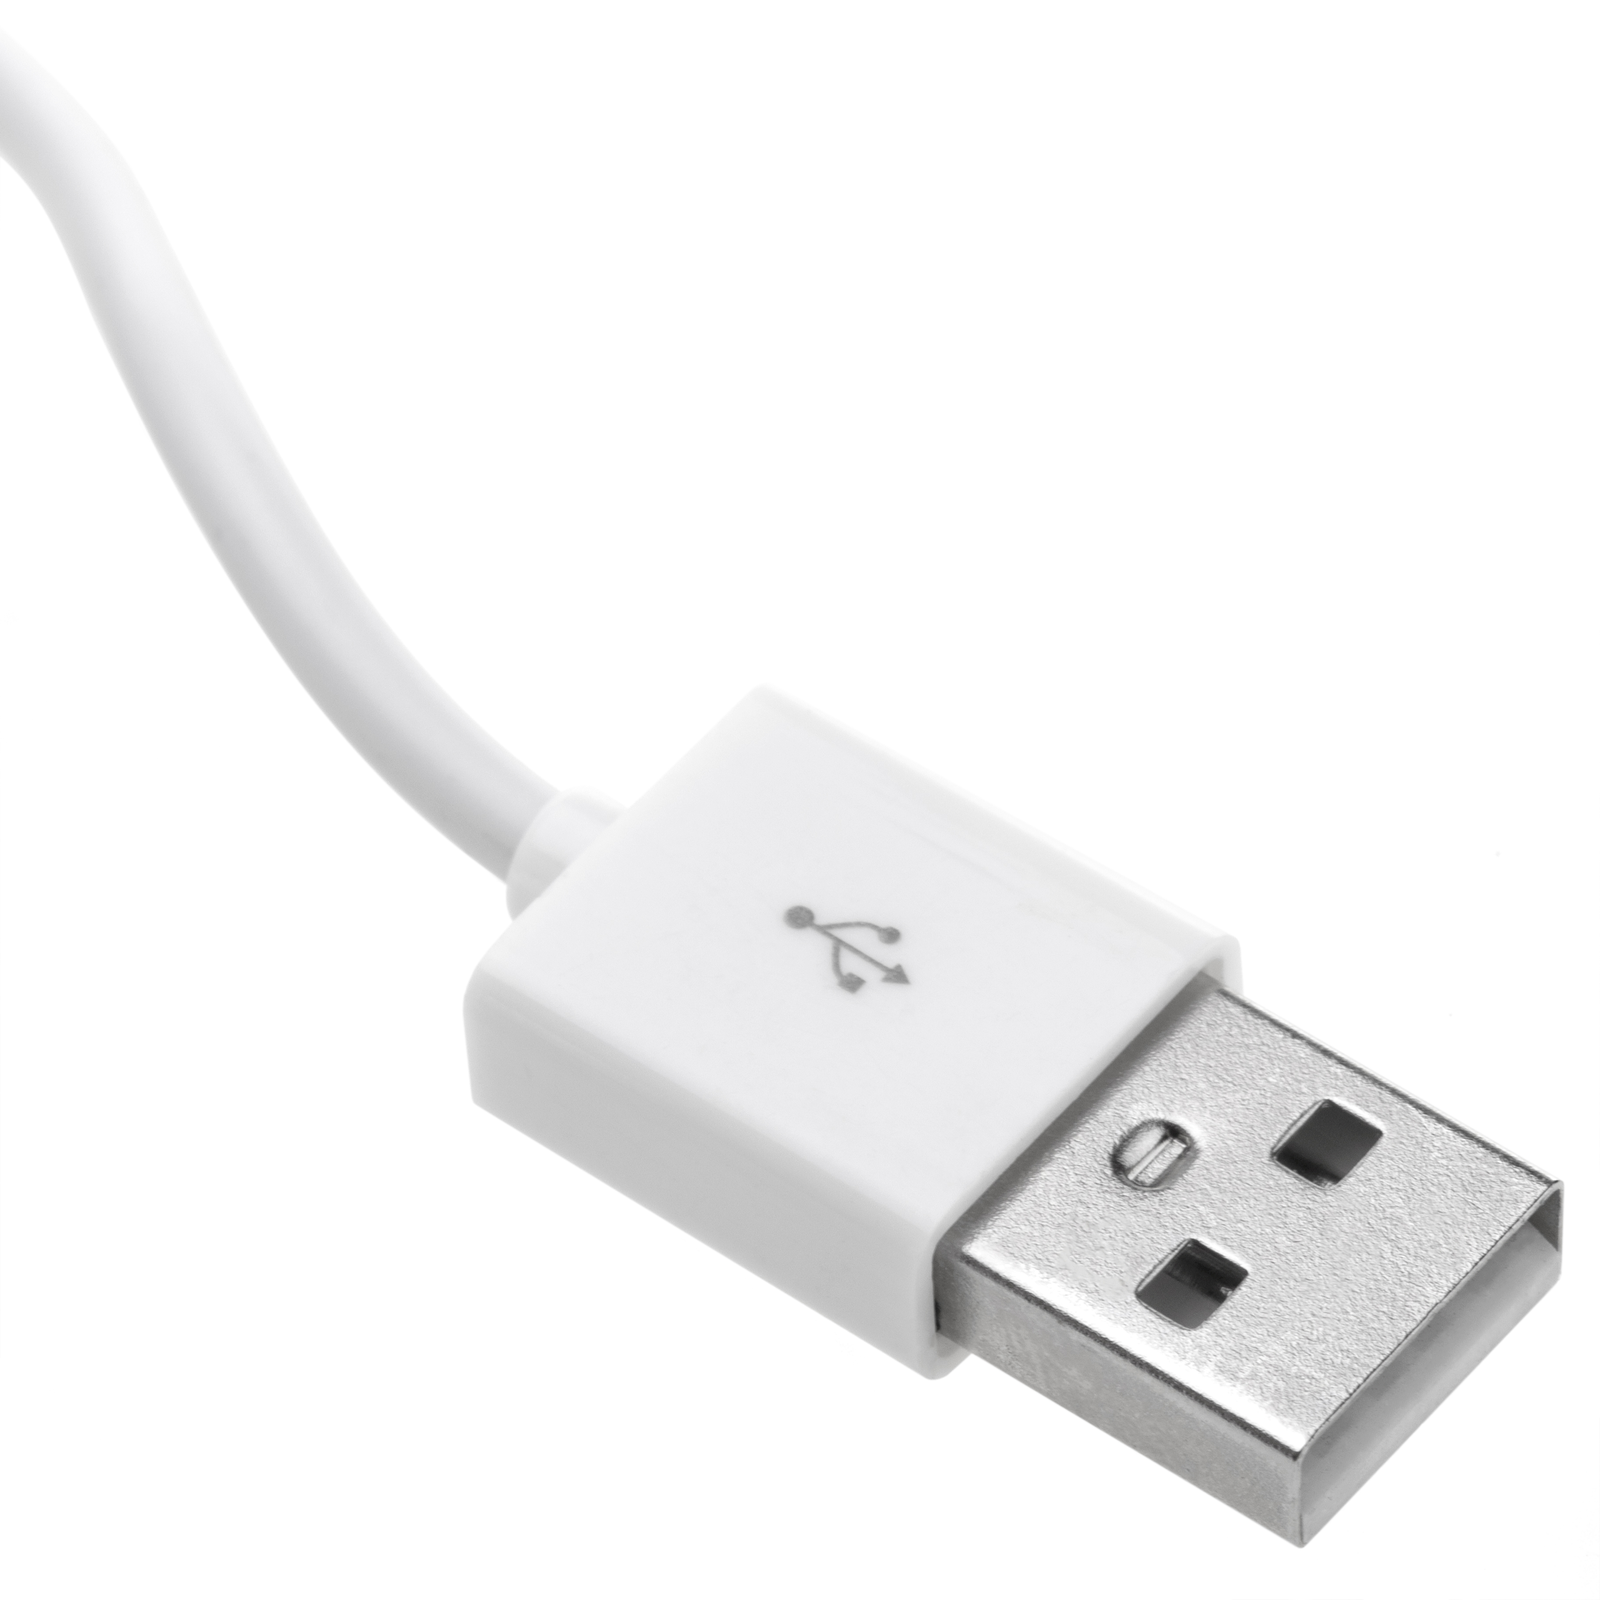 USB 2.0 Data Link Cable - Cablematic